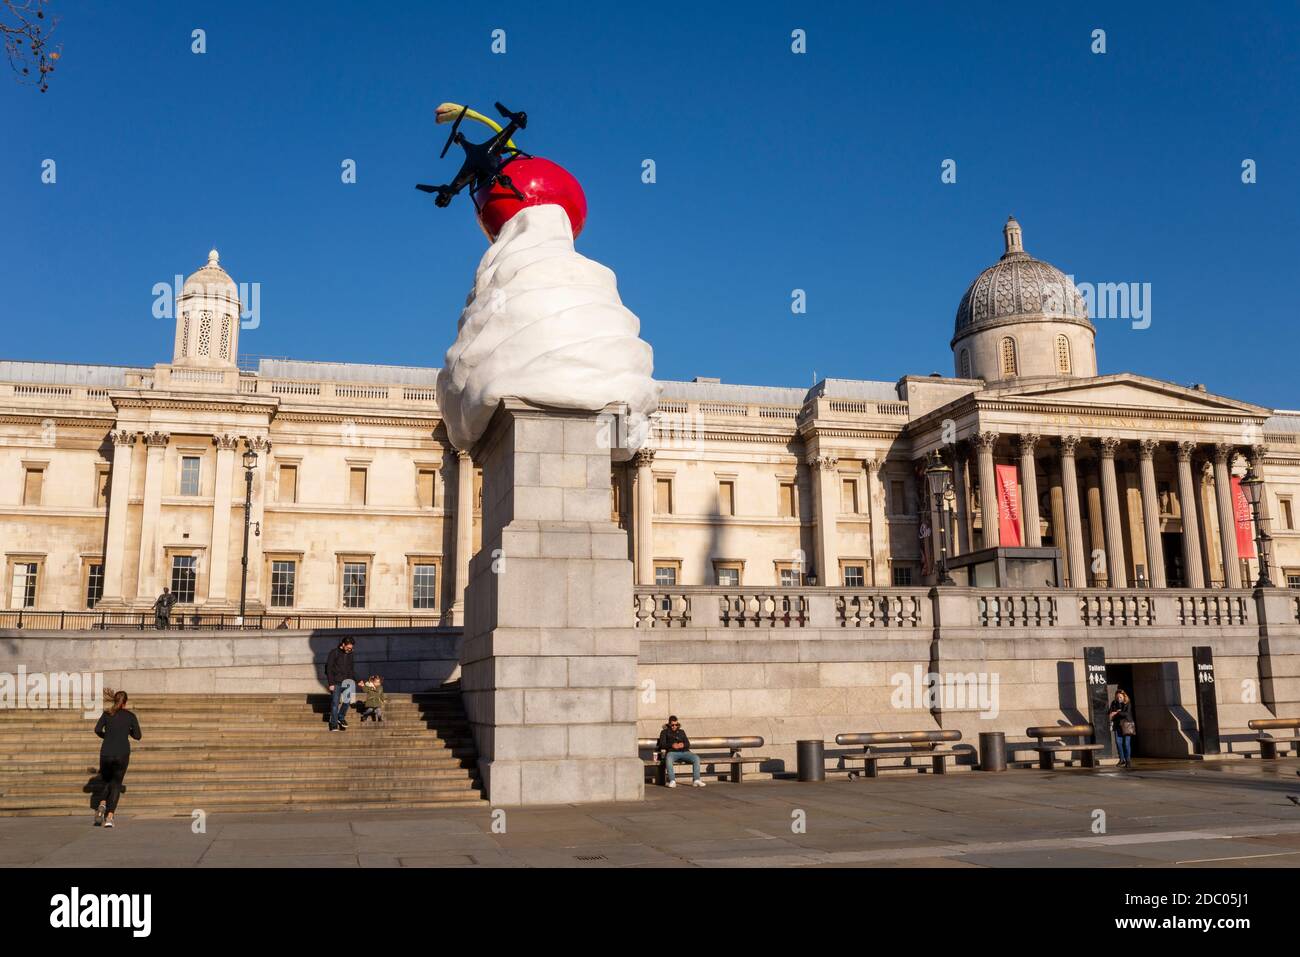 The End. Dollop of whipped cream with assortment of toppings: a cherry, a fly, and a drone. Fourth plinth art outside National Gallery. Lockdown quiet Stock Photo